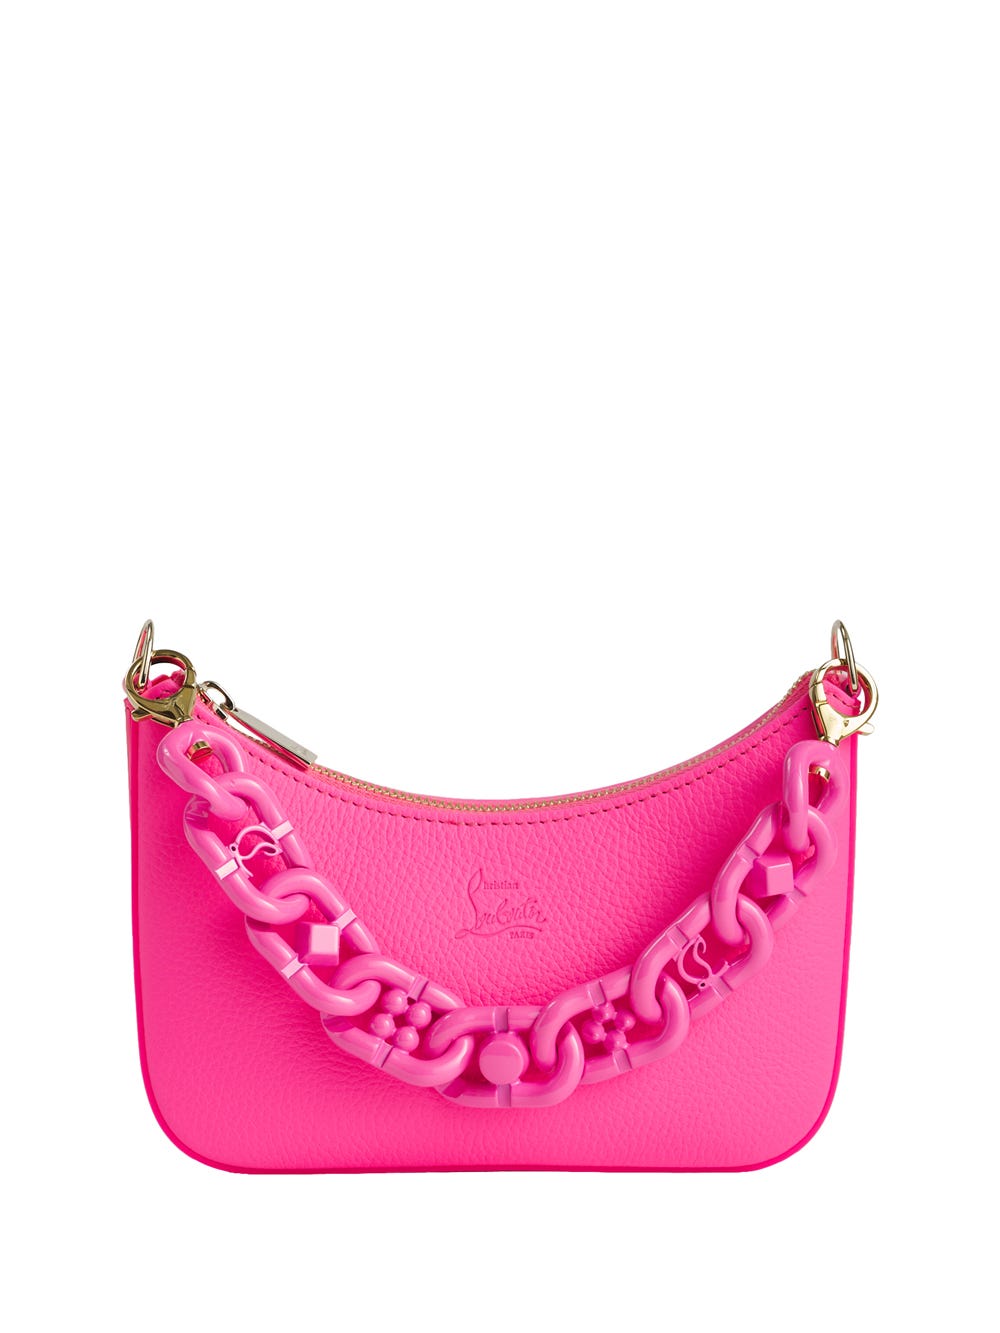 Loubifever Medium Patent Leather Tote Bag in Pink - Christian